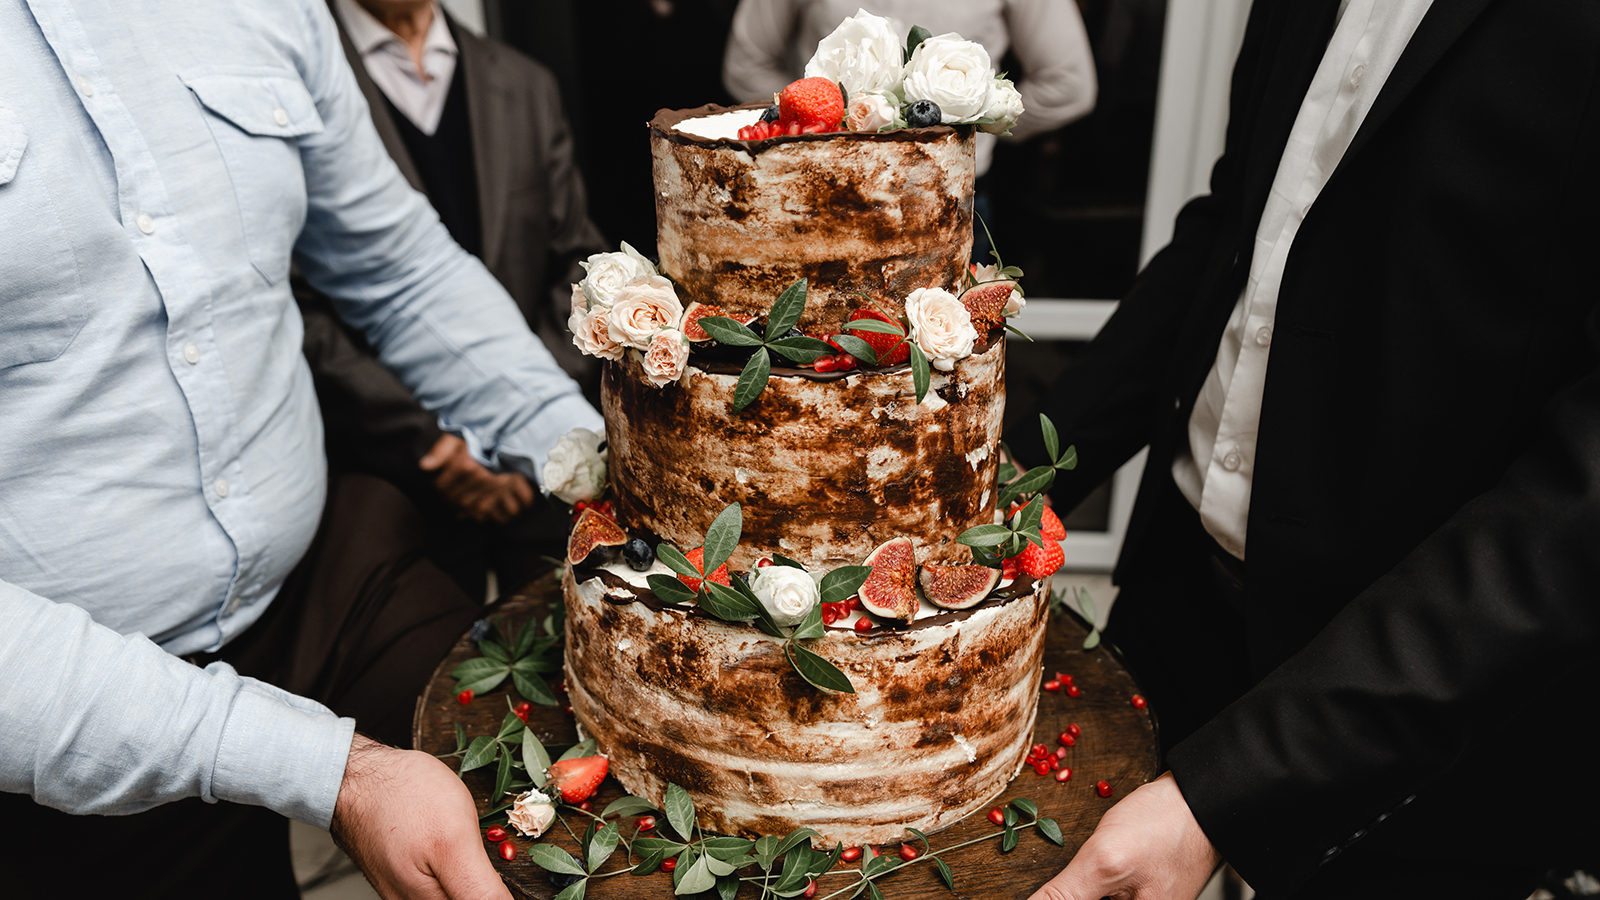 Elegant wedding cake decorated with roses and fruits with bride and groom on background. Wedding ceremony. Beautiful pie on the table. Brides cut cake together. Close up